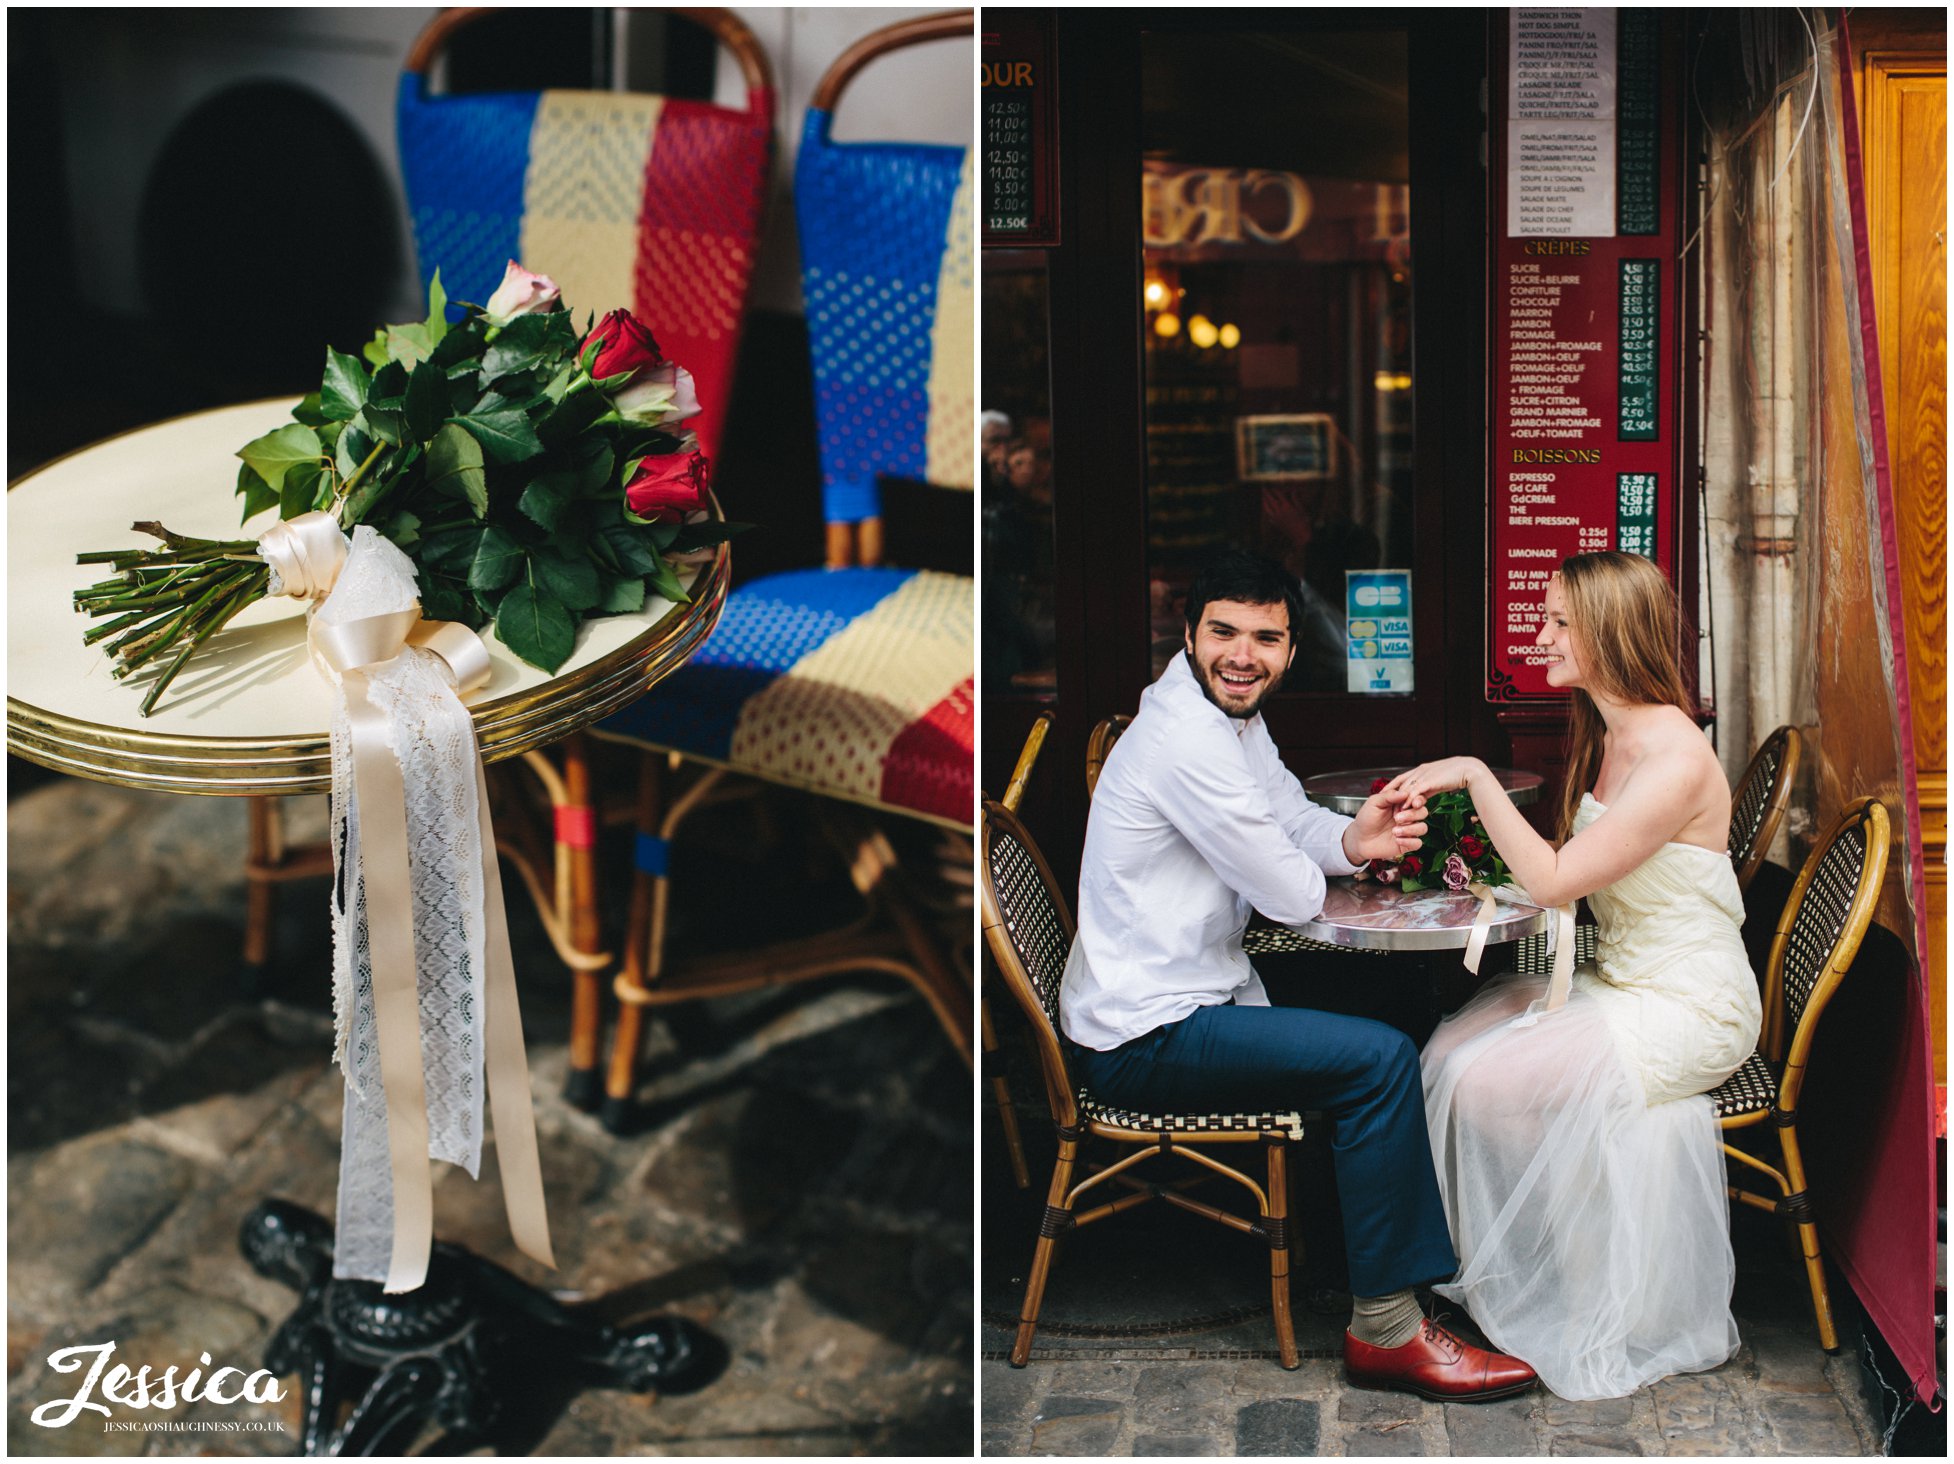 Newly Wed's sitting outside a cafe in mont marte, paris